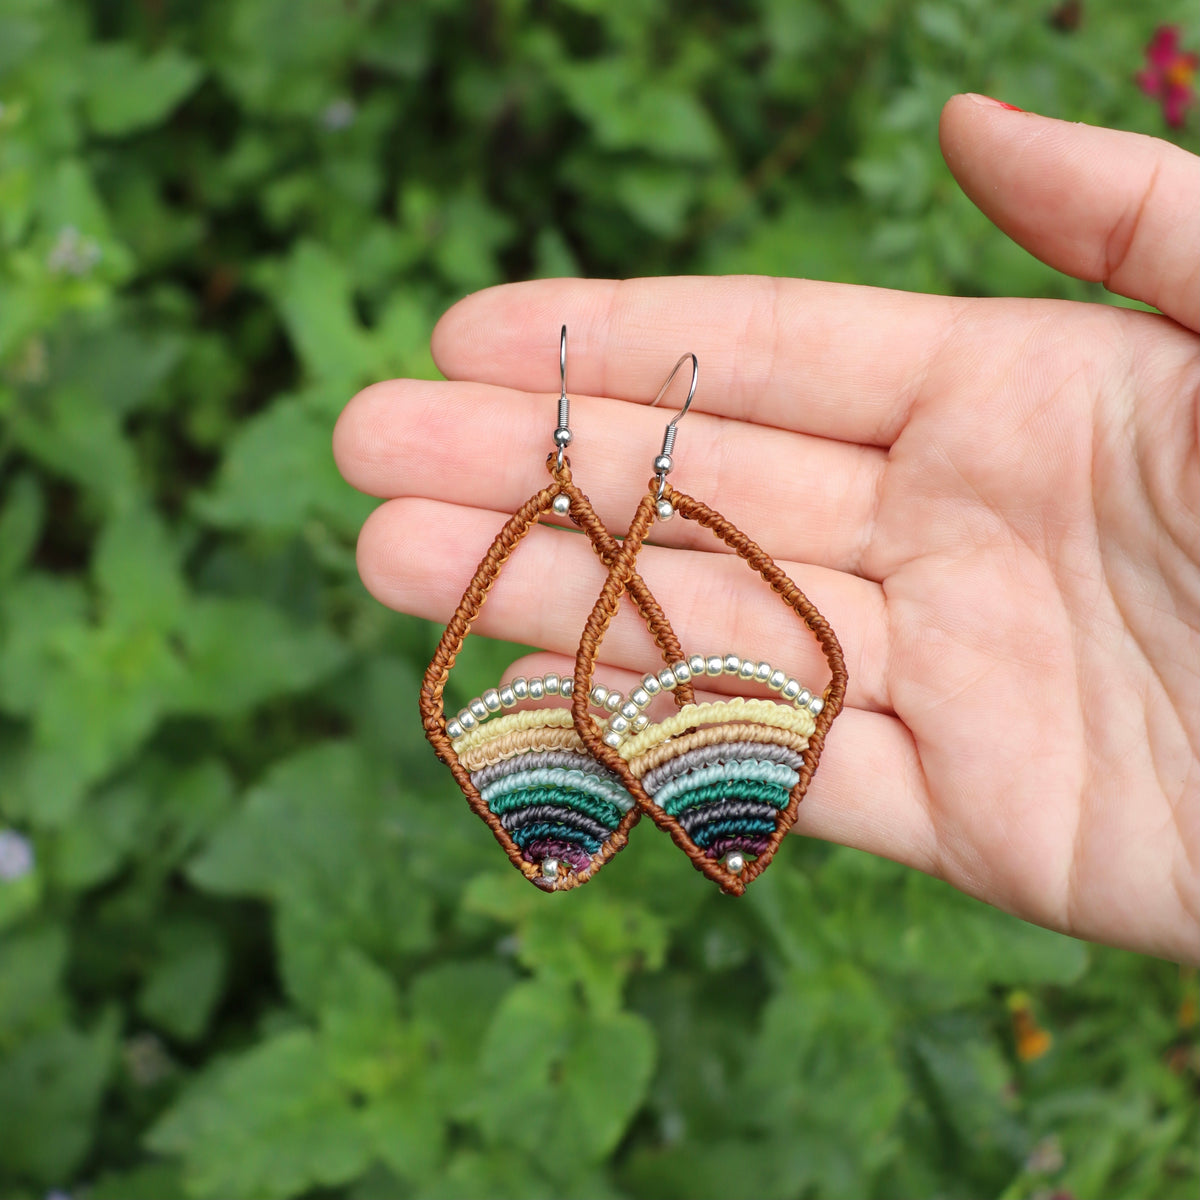 Rainbow Macrame Earrings - You choose the style & color! – Costa